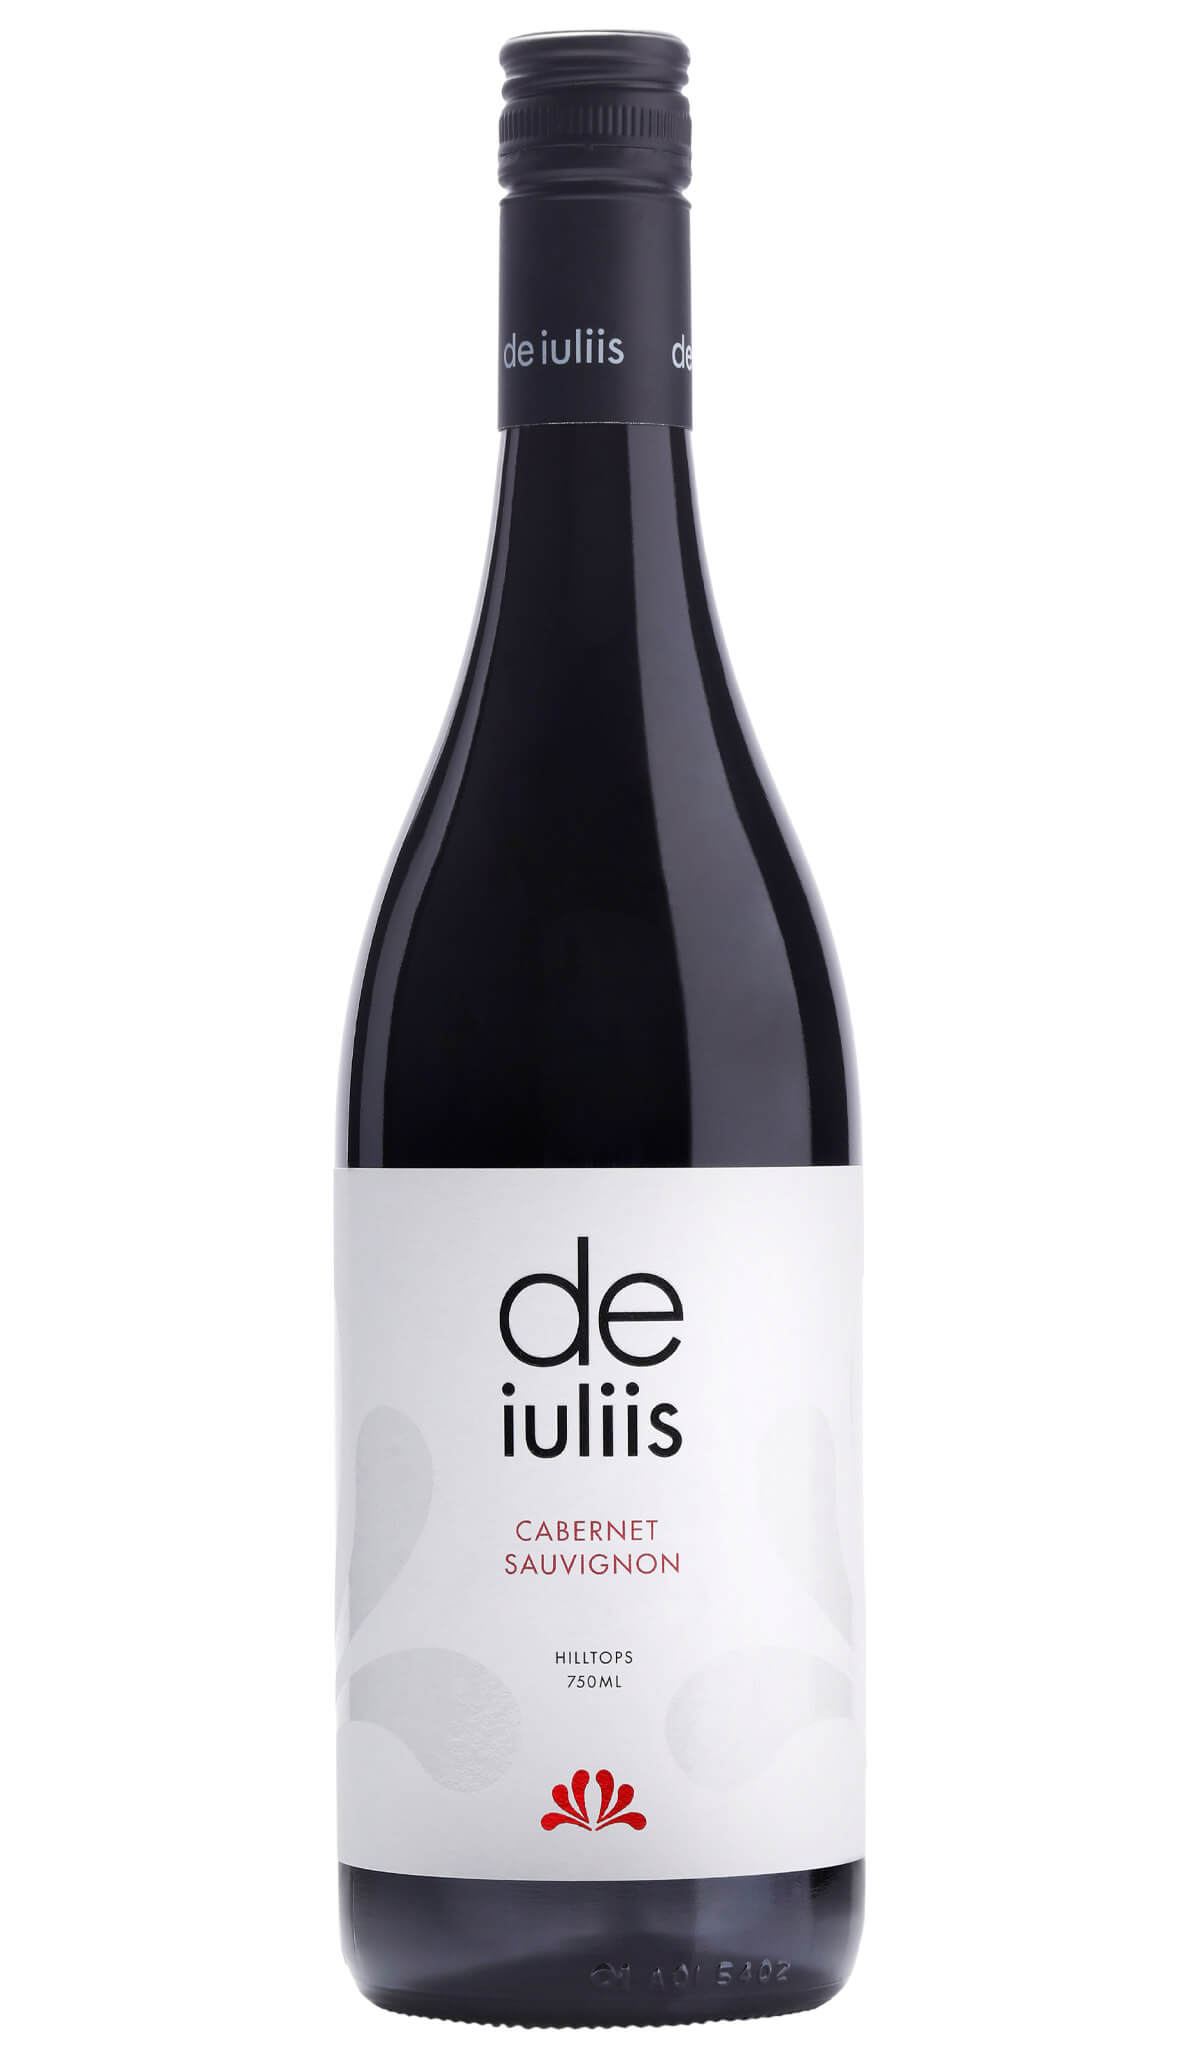 Find out more, explore the range and purchse De Iuliis Hilltops Cabernet Sauvignon 2021 available online at Wine Sellers Direct - Australia's independent liquor specialists.